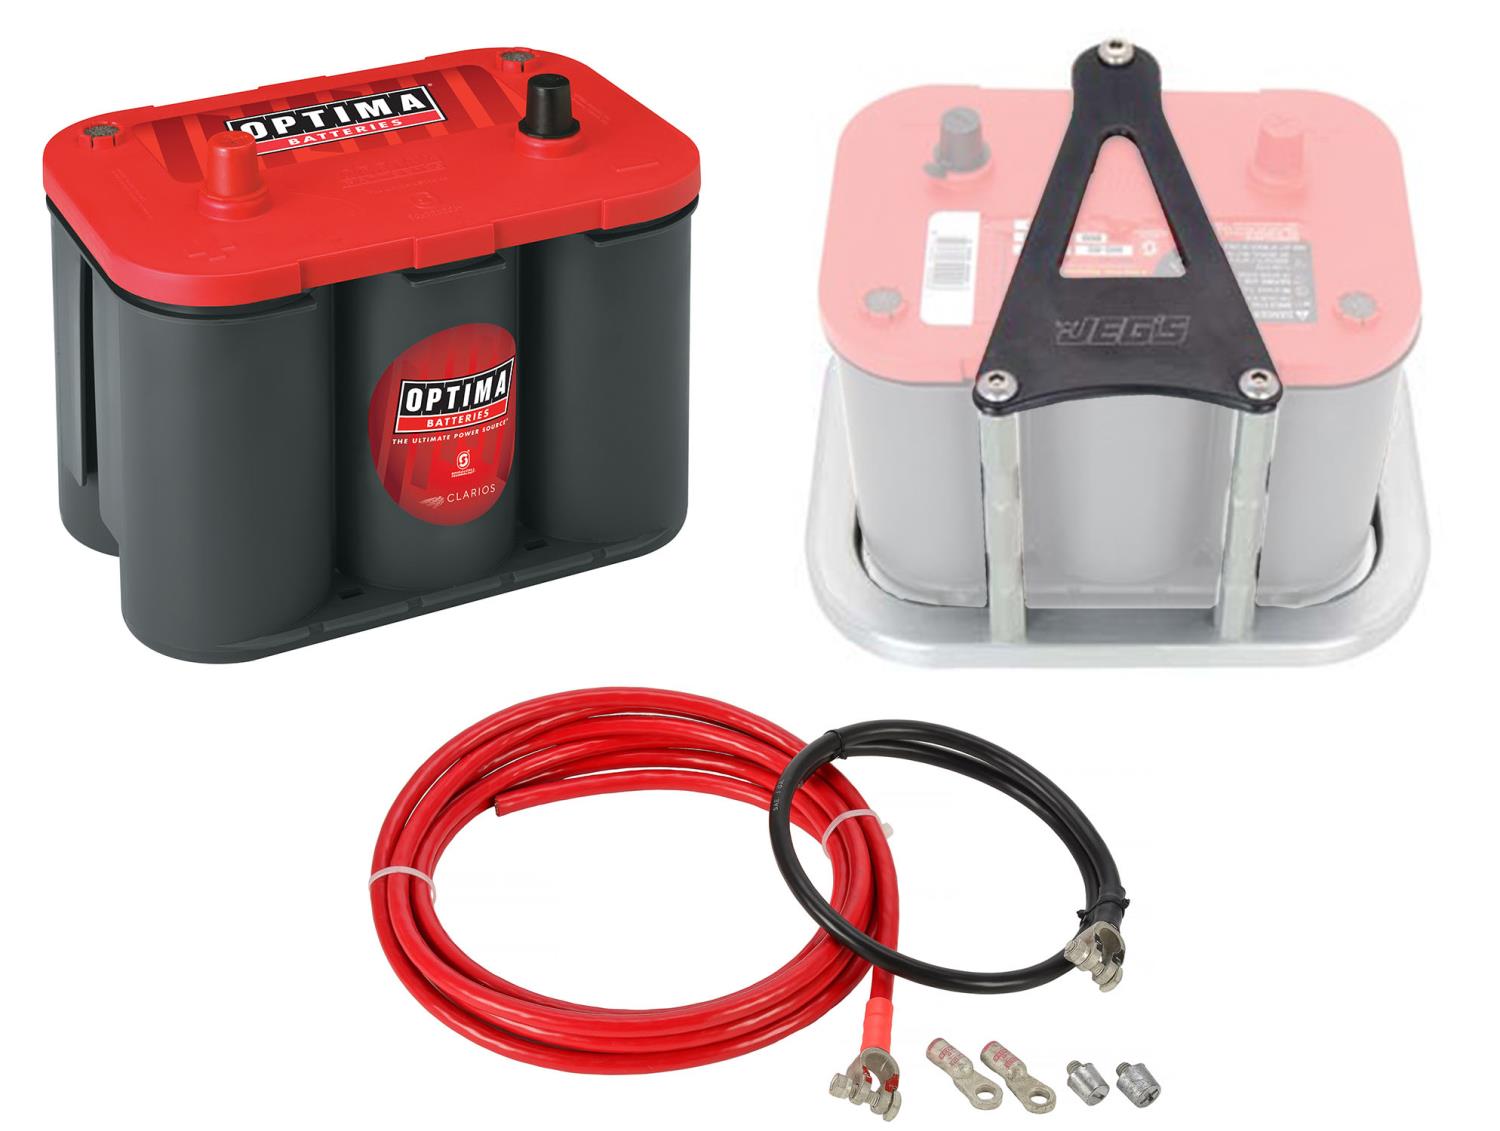 RedTop 12 V Battery and Clear/Black Finish Mount Kit